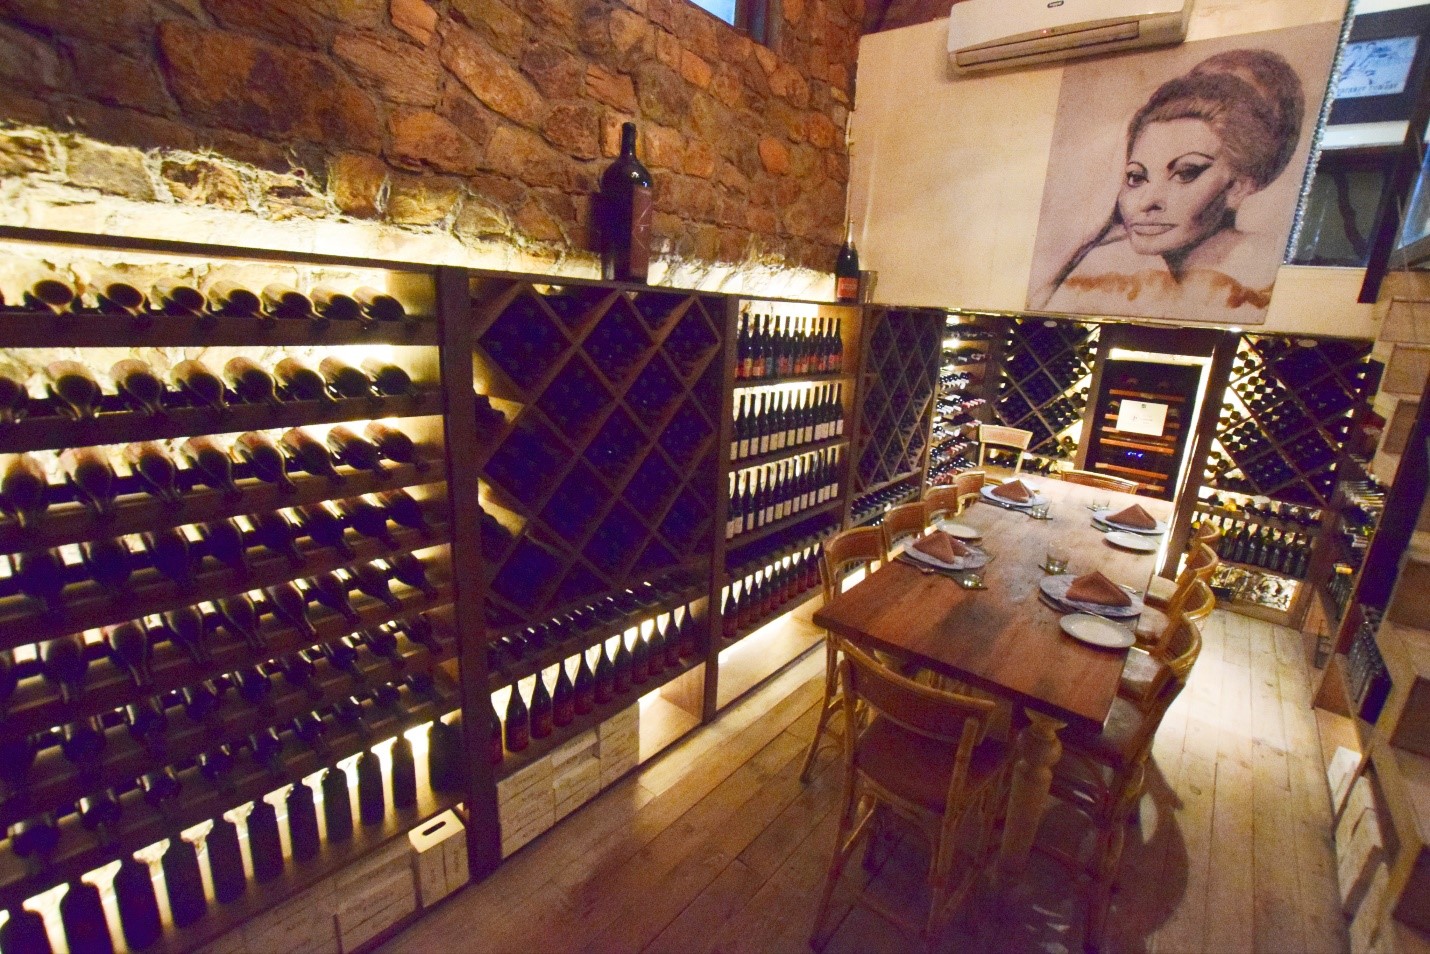 Their underground wine cellar is a perfect place for exclusive dinners for small groups. It can normally accommodate up to 10 people, but now due to physical distancing protocols, only 4-5 people can dine in this area. 